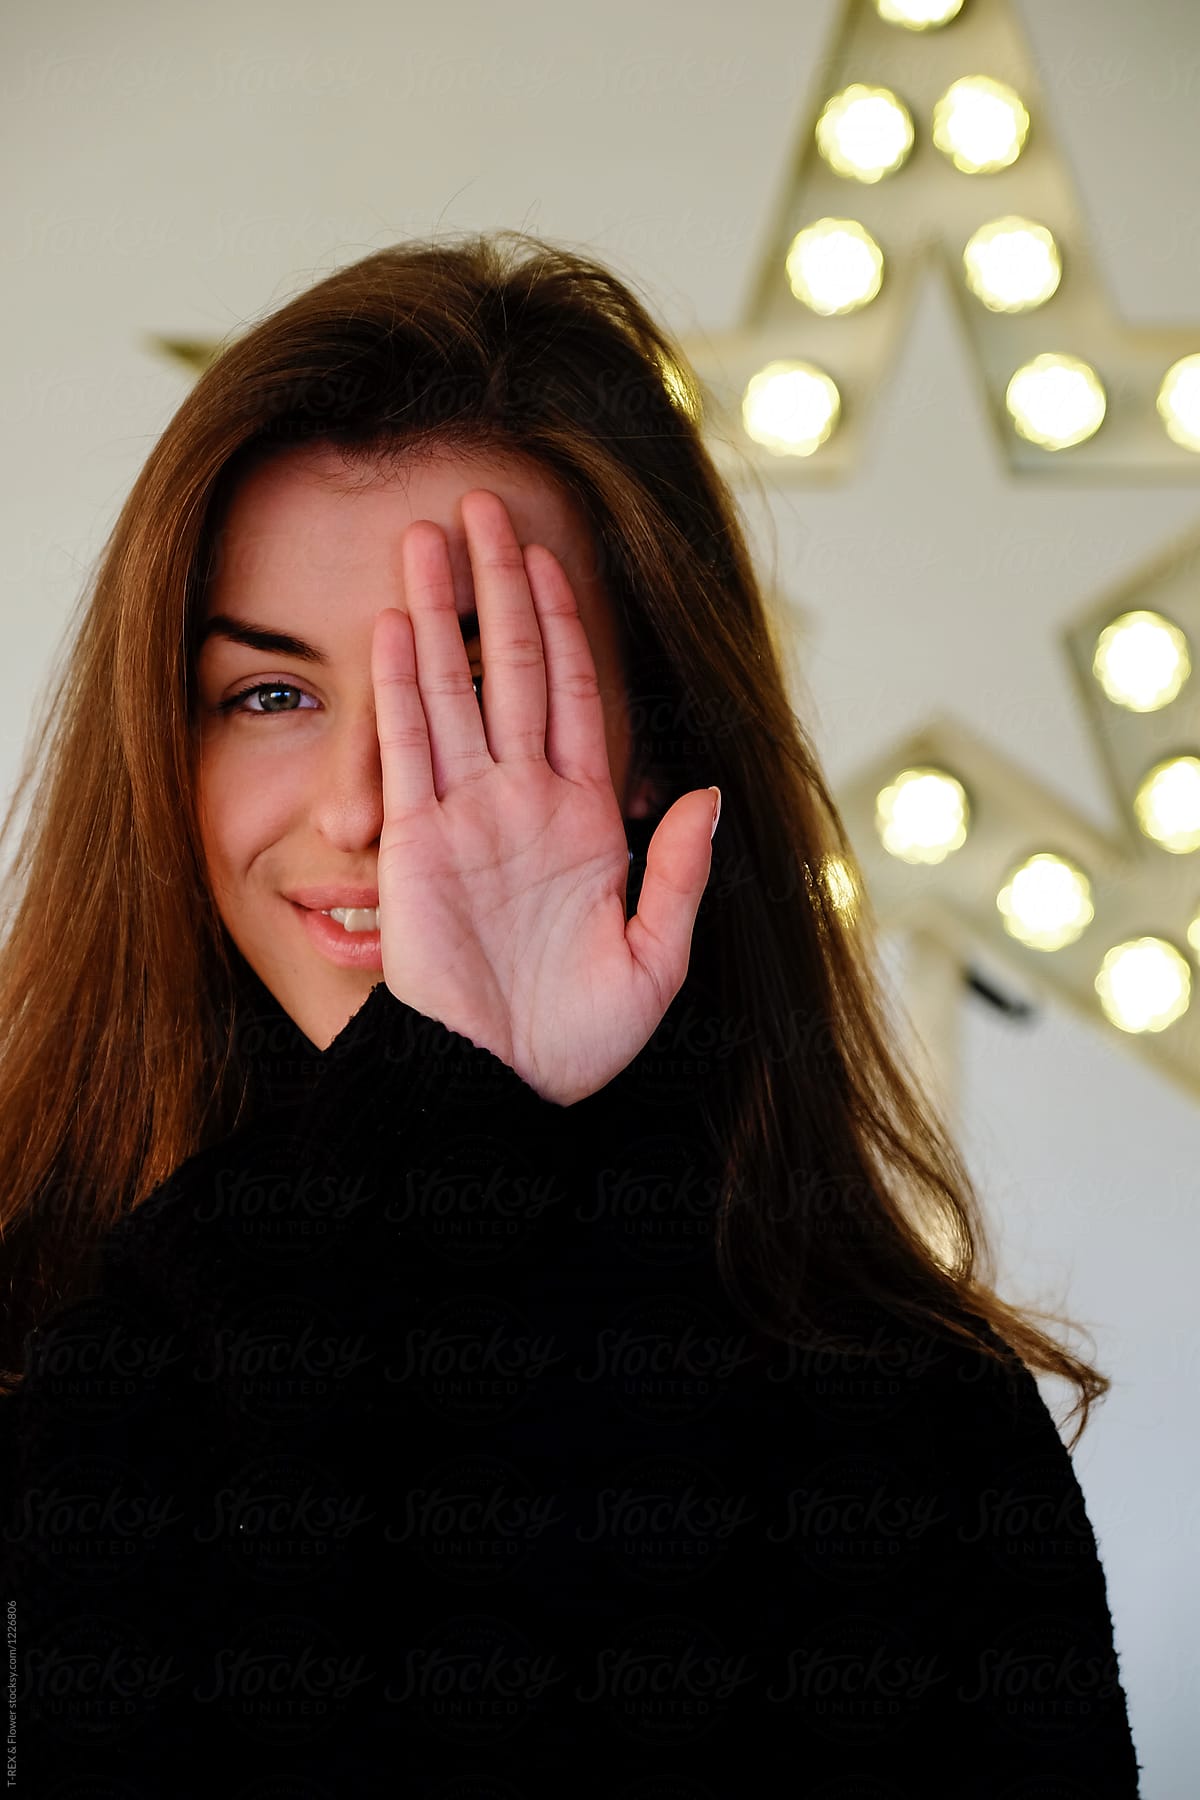 Smiling woman covering eye with hand